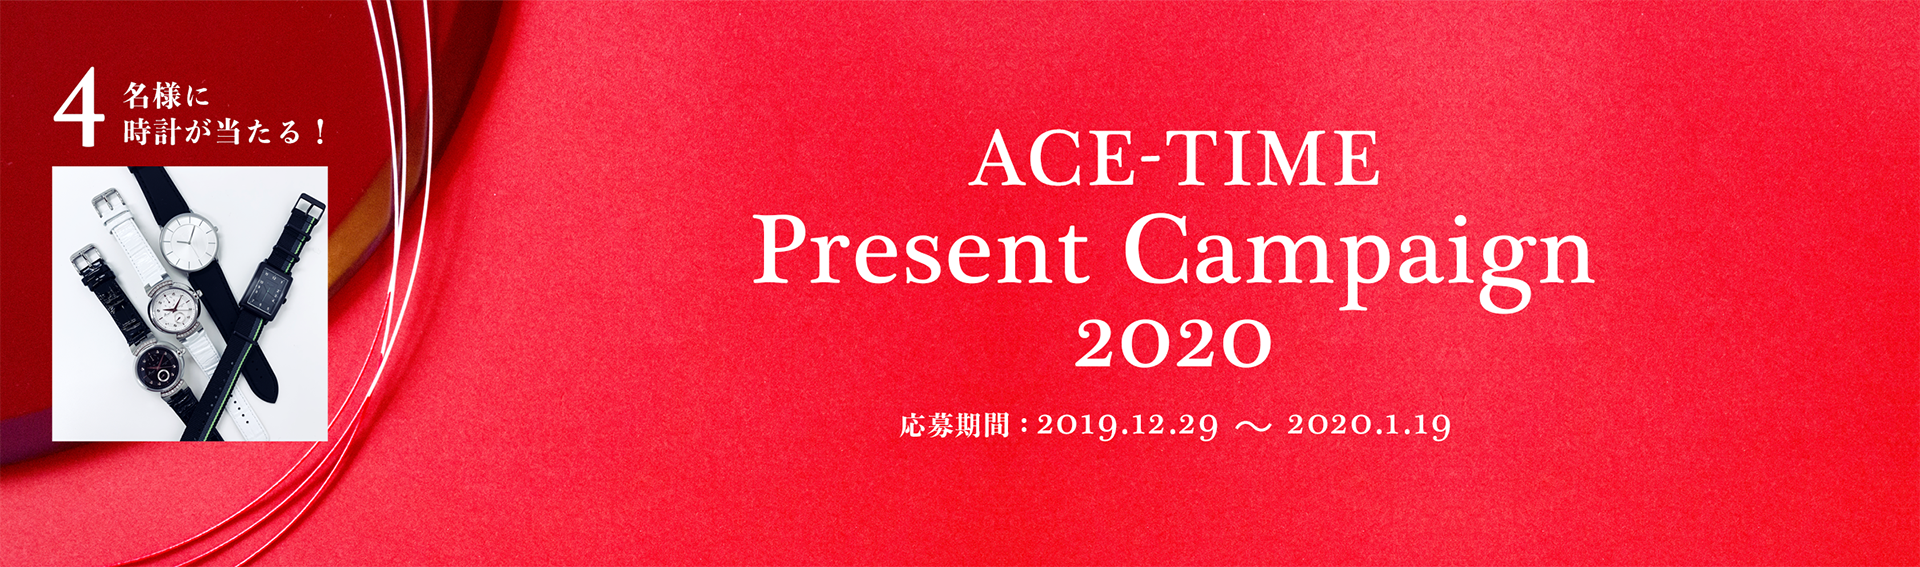 ACE-TIME プレゼントキャンペーン 2020